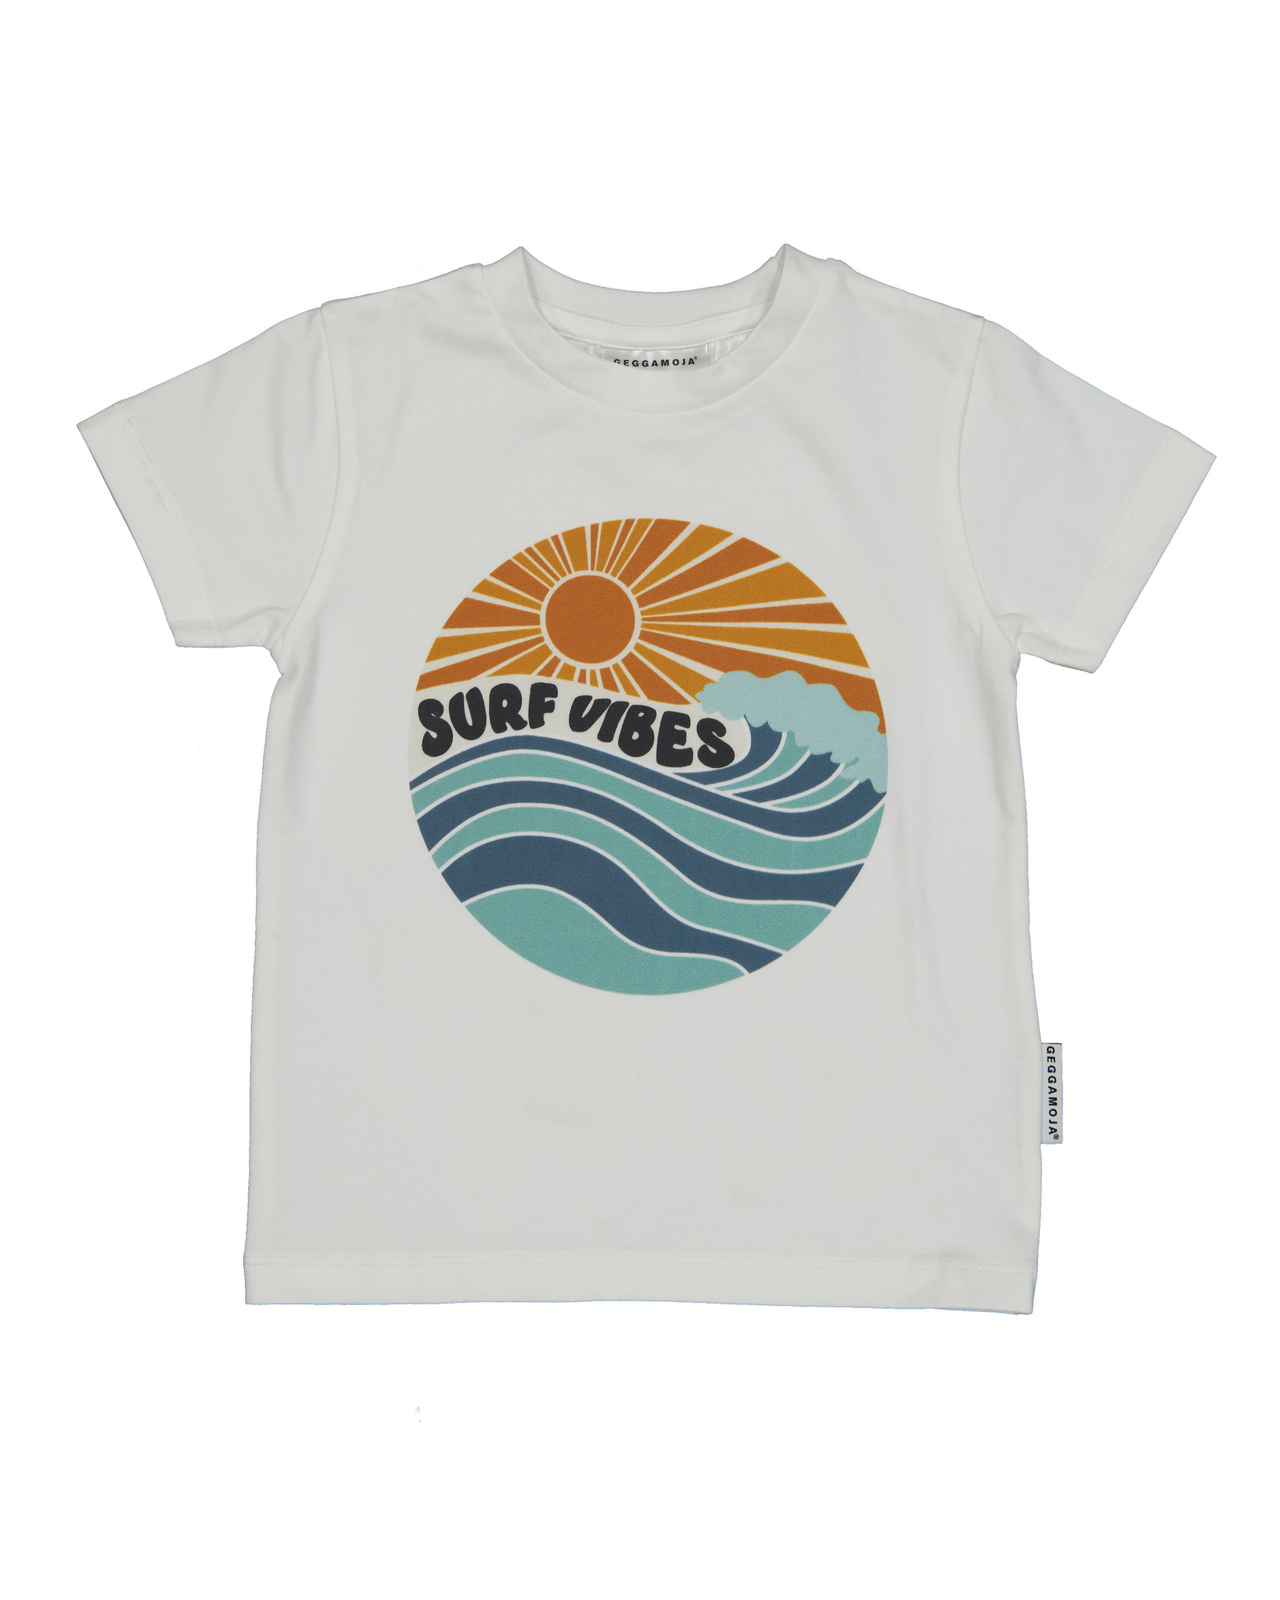 T-shirt Surf vibes Offwhite 86/92